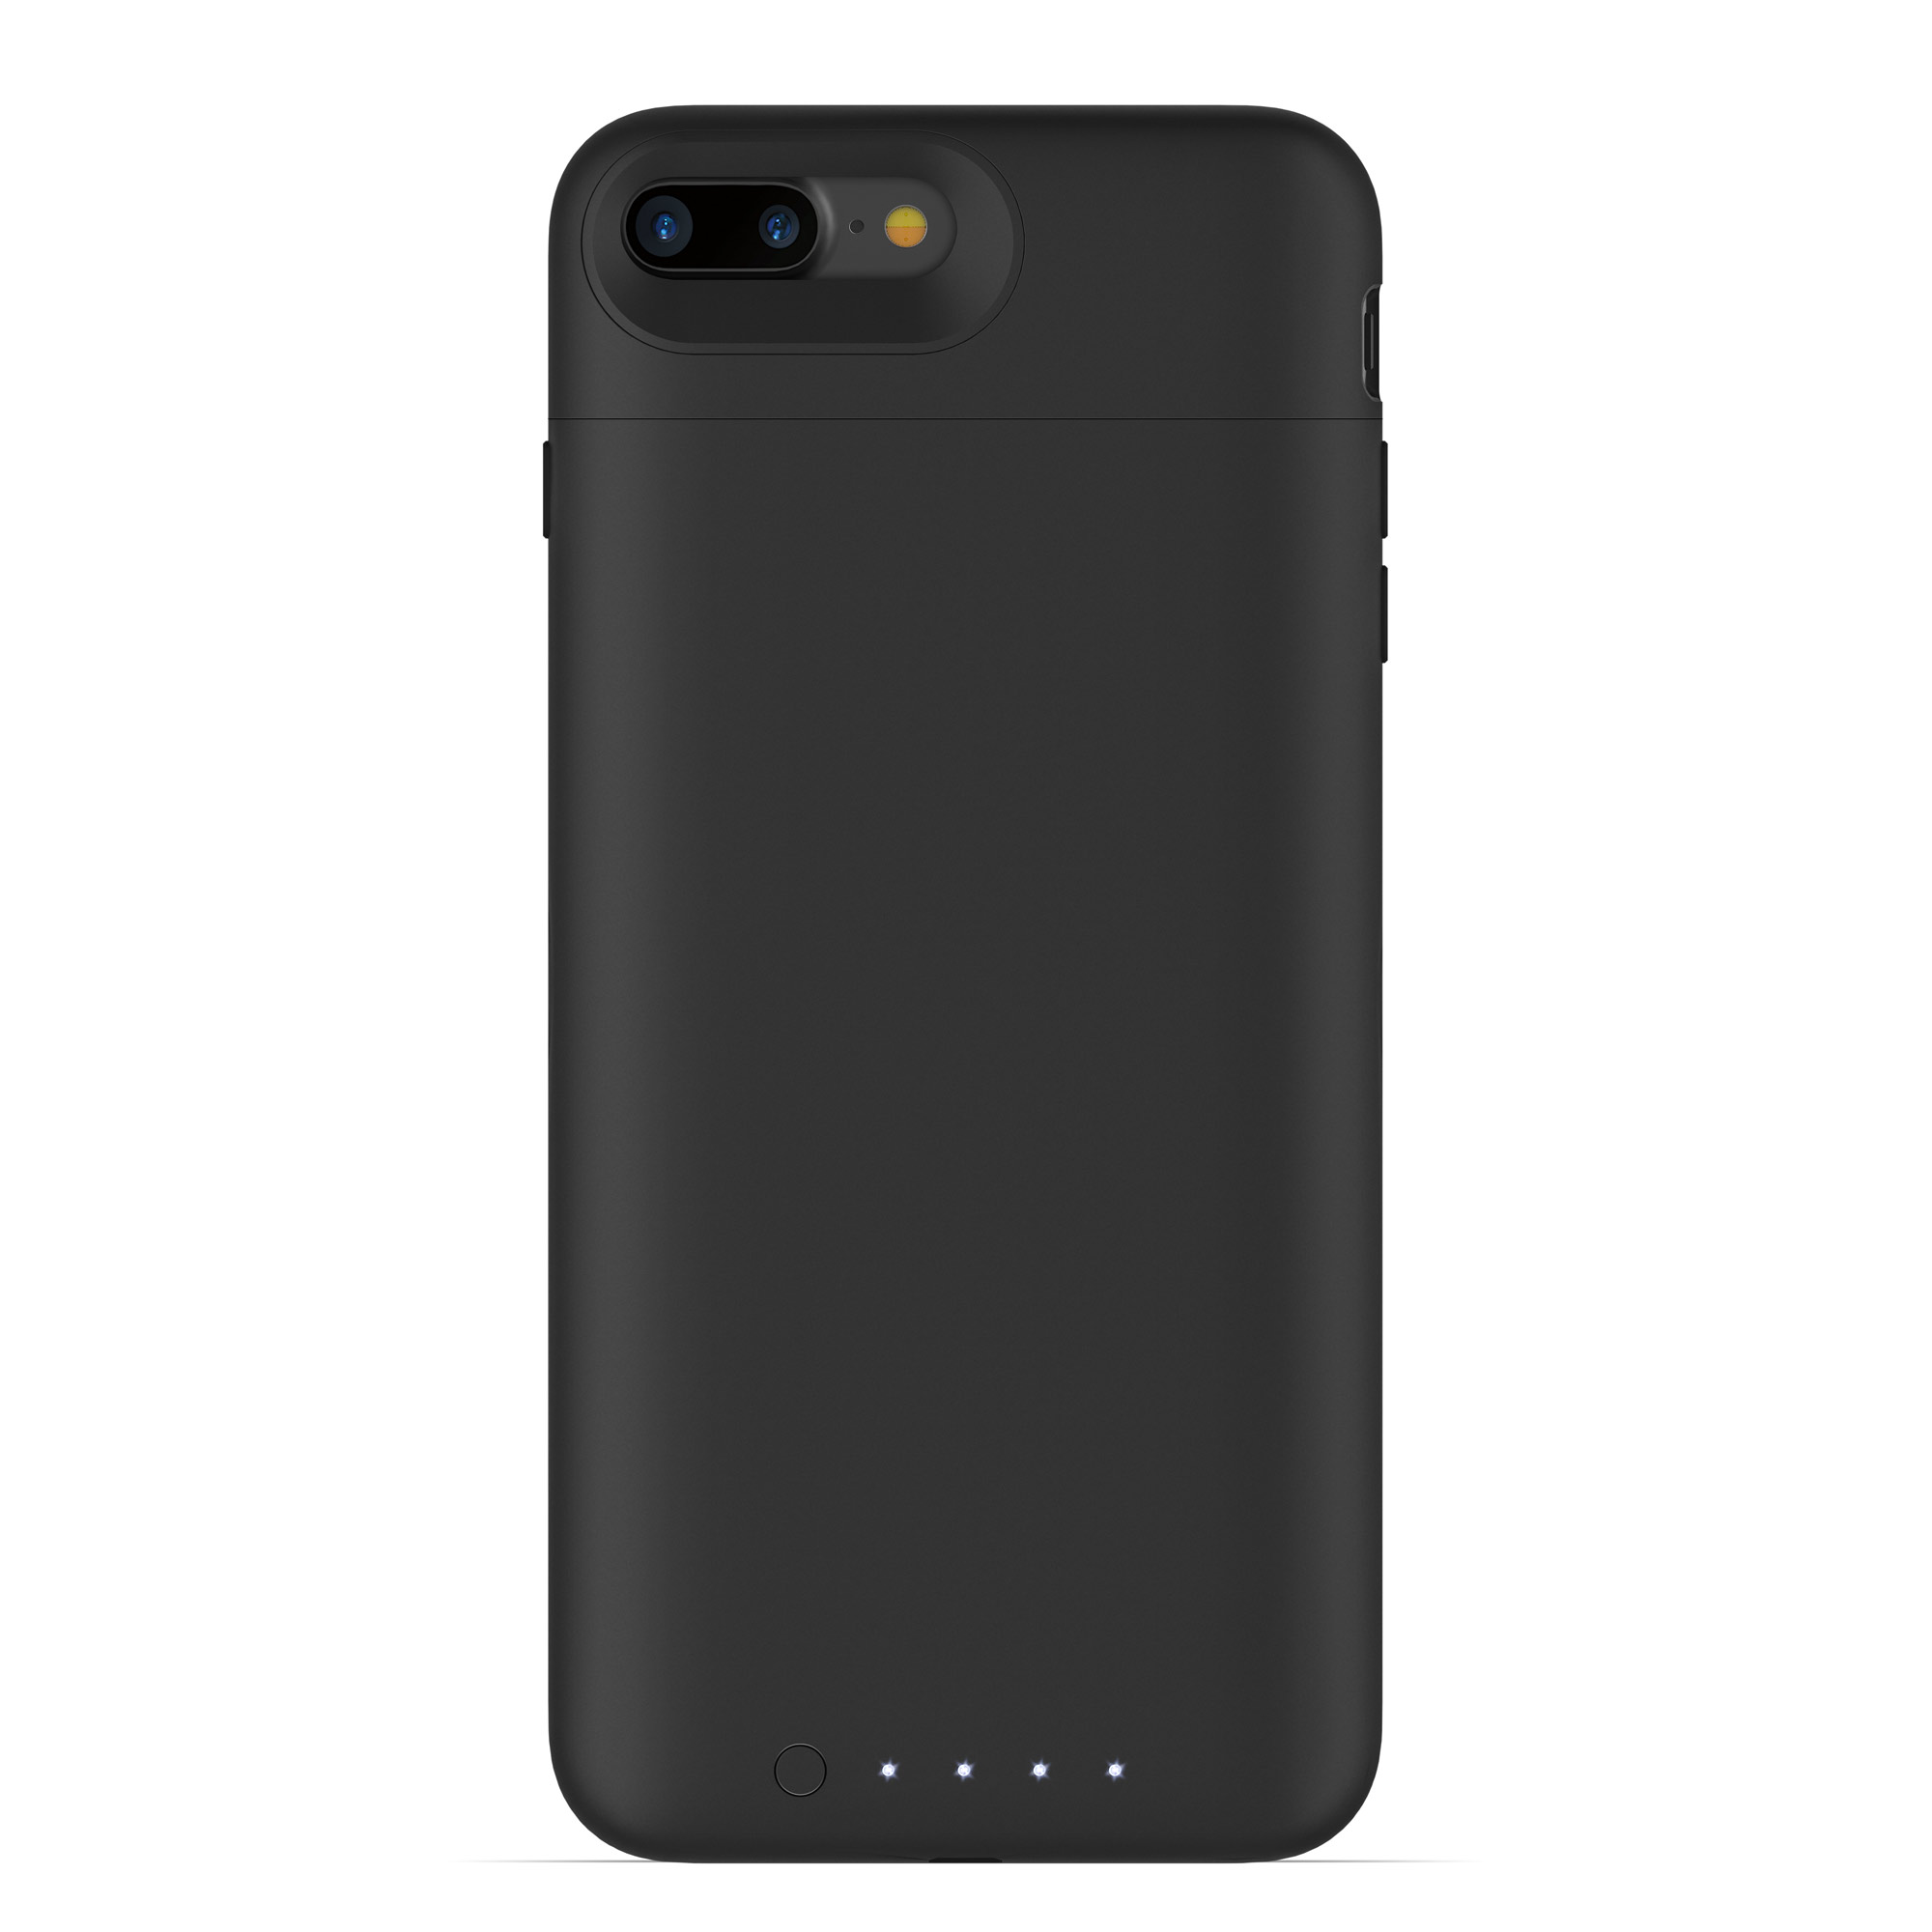 mophie juice pack air for iPhone 8 Plus/7 Plus